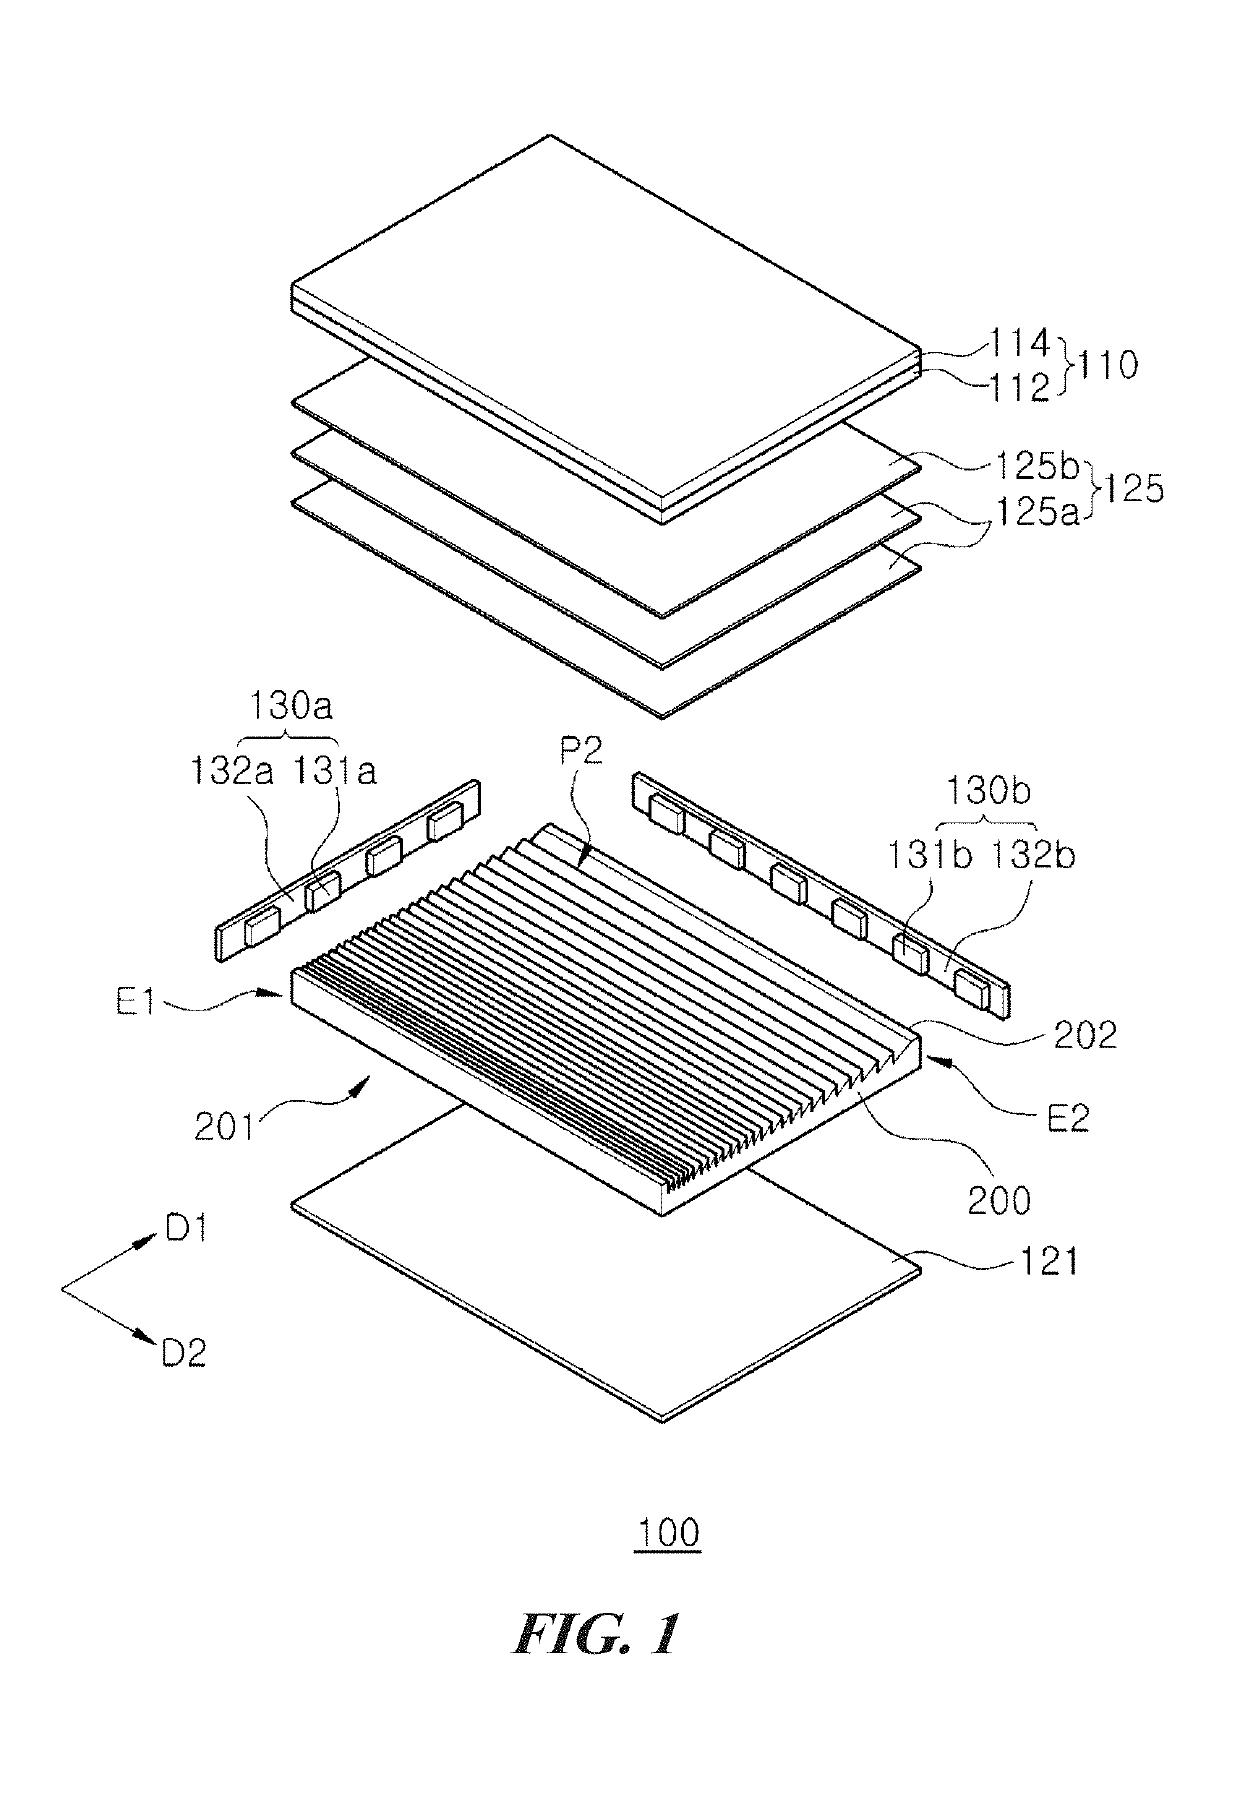 Liquid crystal display device comprising a light guide plate having a first prism pattern on a lower surface and a second prism pattern on an upper surface